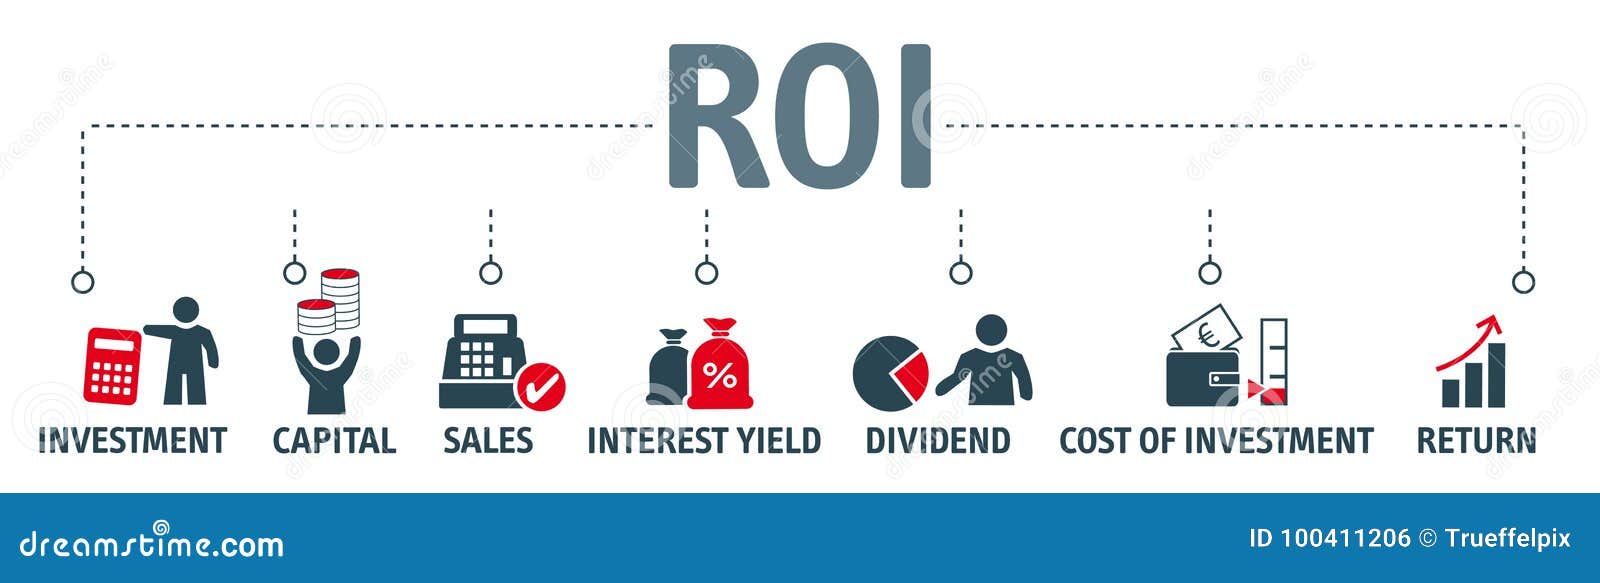 Roi Return On Investment Banner Mit Icons Vektor Illustration Stock Illustration Illustration Of Assets Control